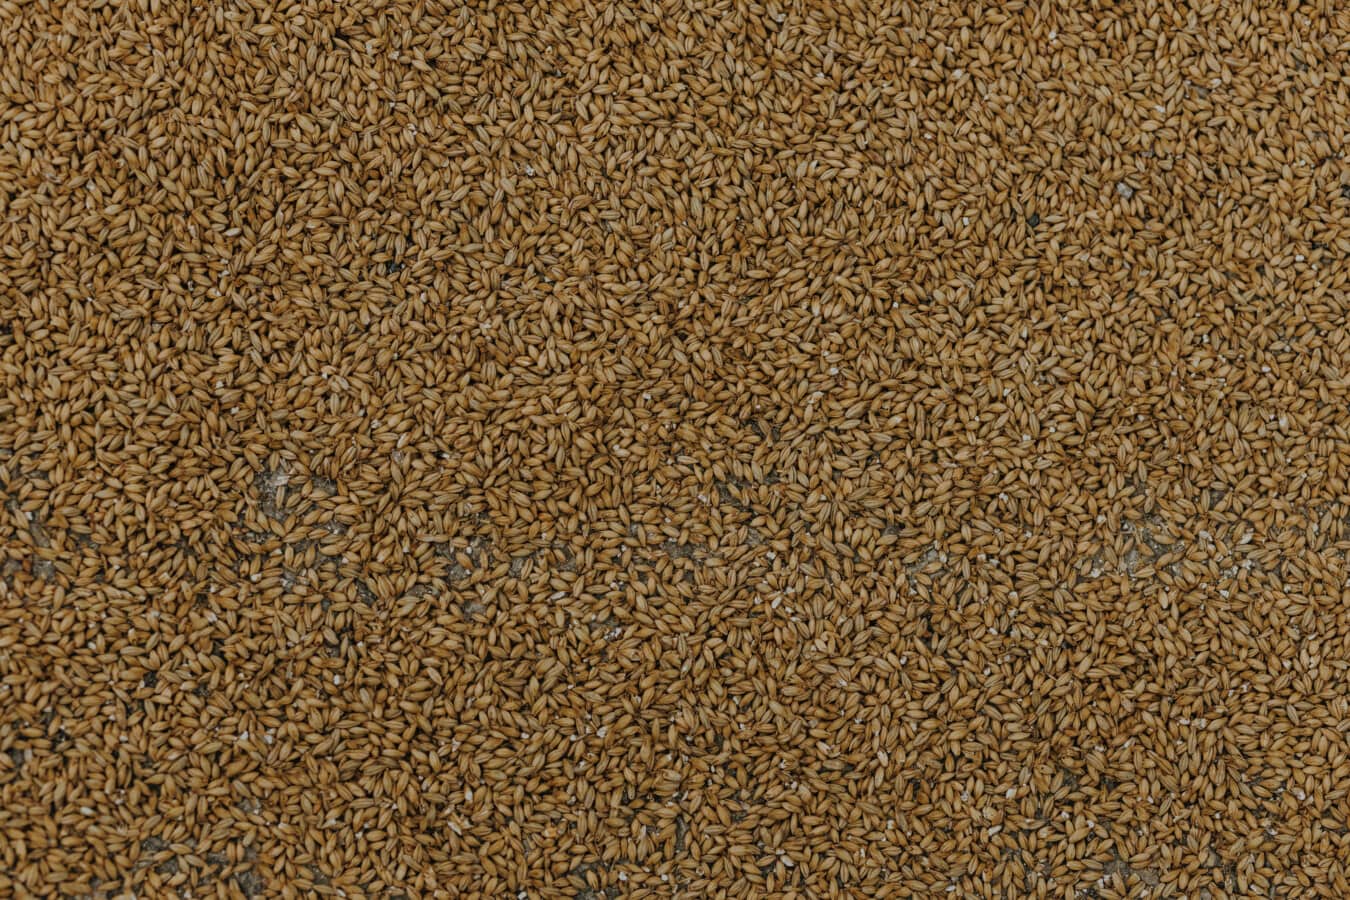 wheat, seed, herb, cereal, texture, pattern, surface, industry, dry, particle